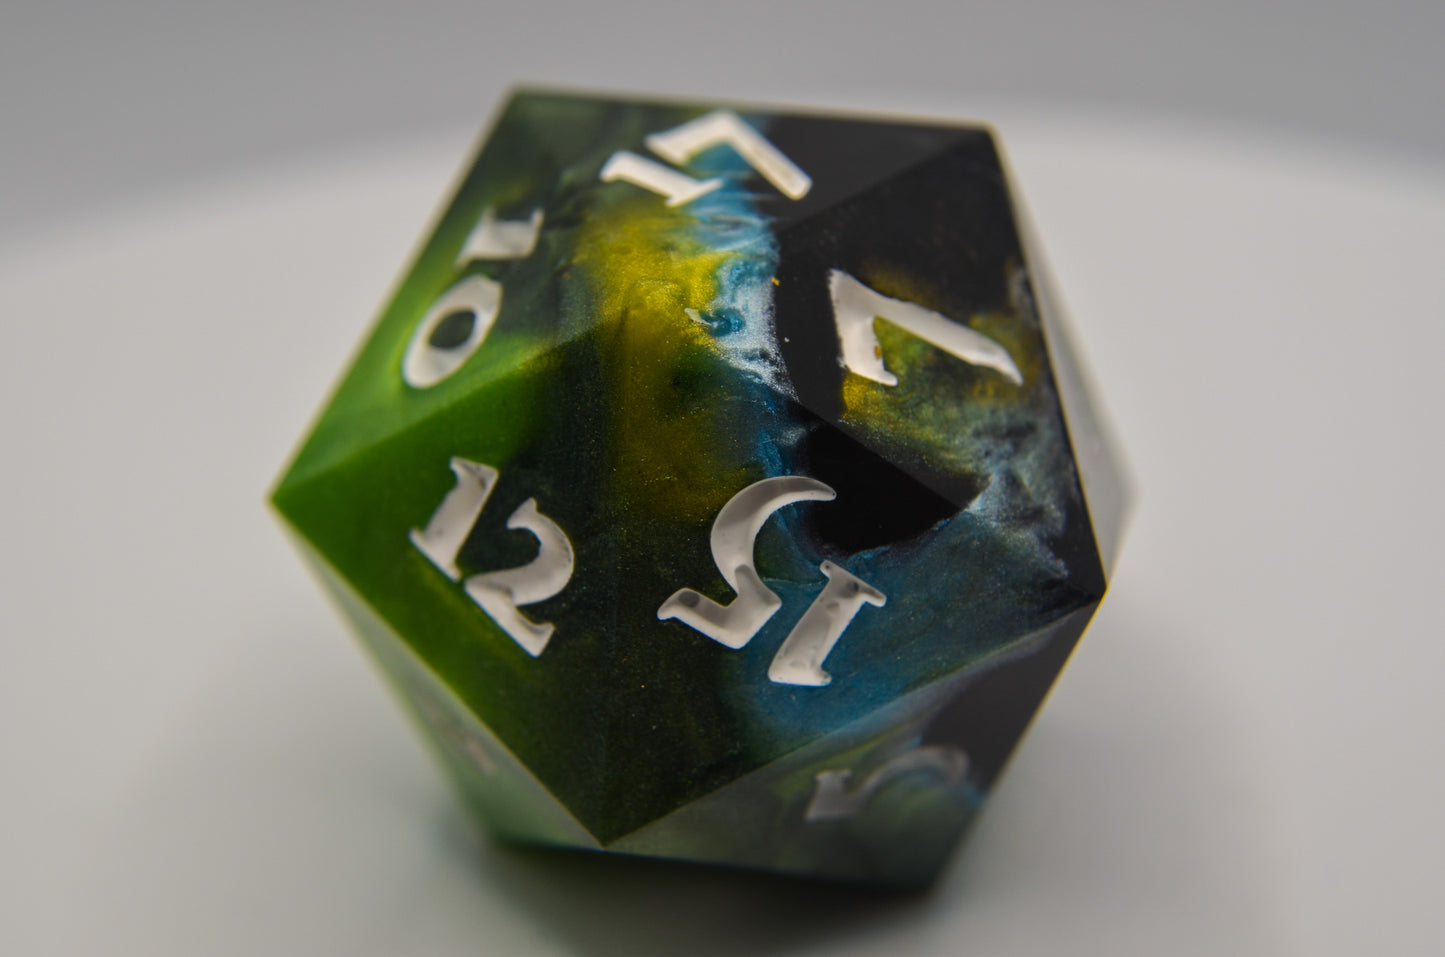 Bright Green, Black, Blue, and Yellow Giant D20